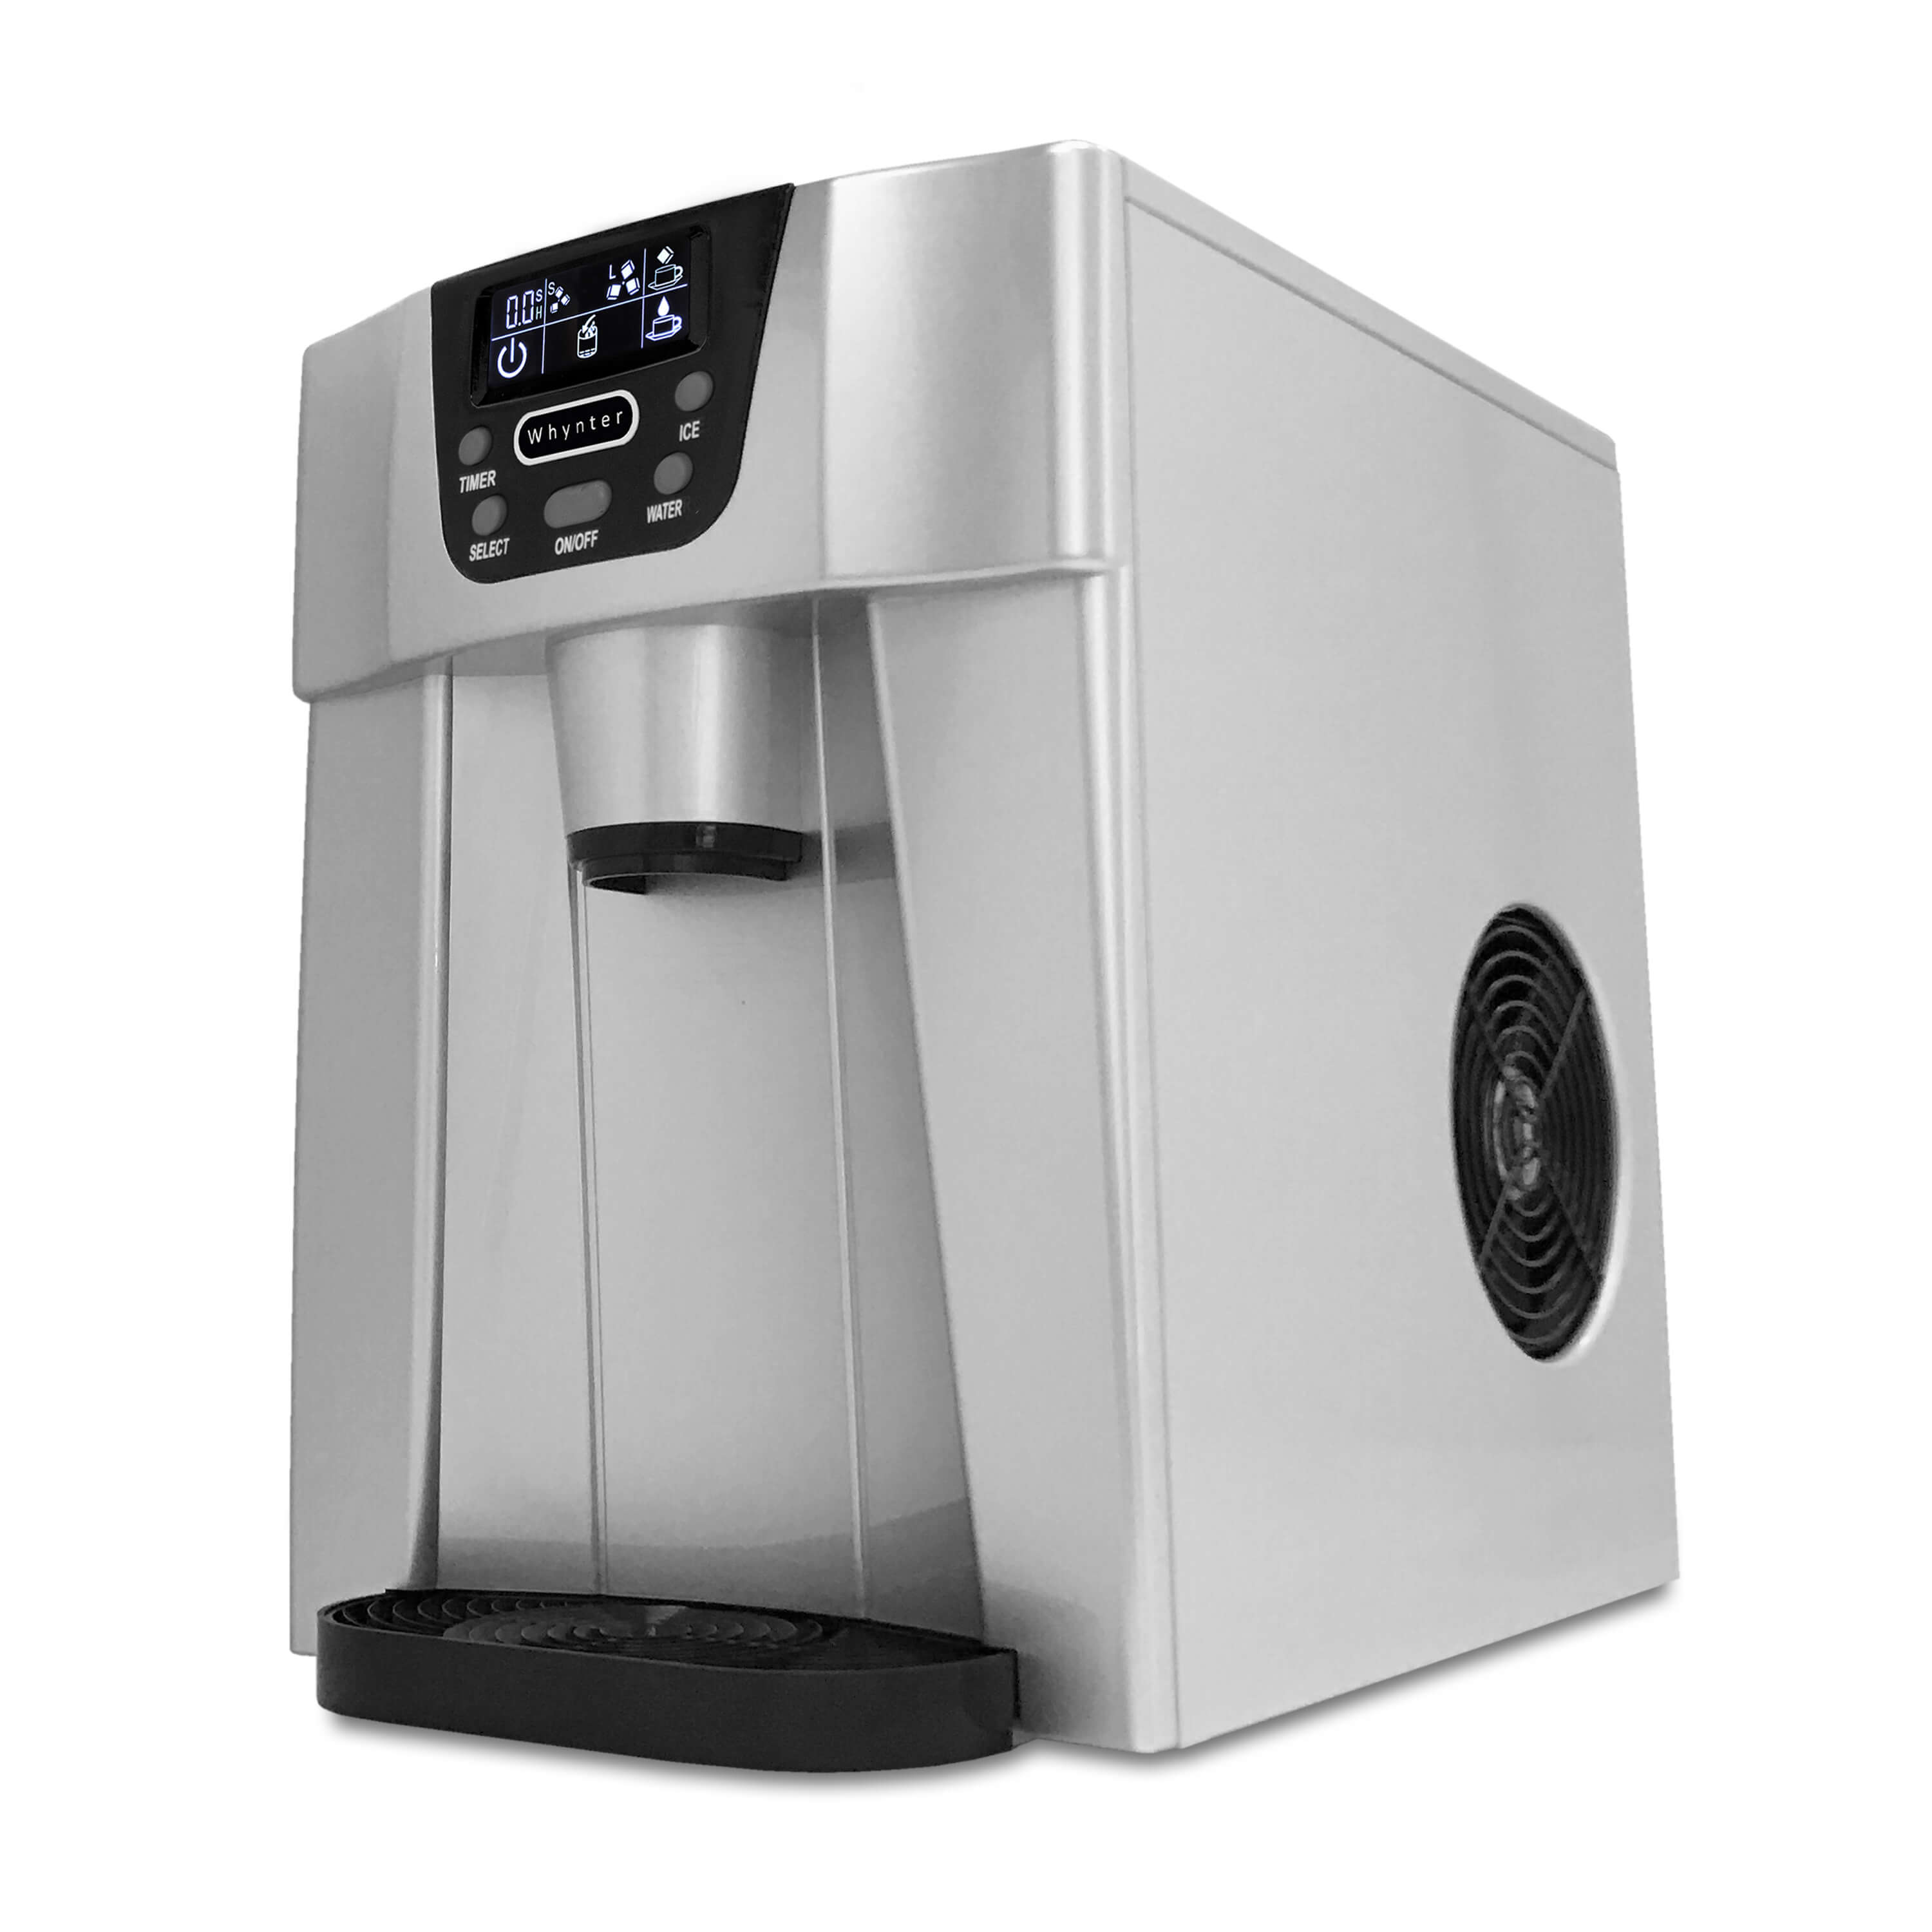 IDC-221SC Counter Ice Maker and Water Dispenser | Whynter